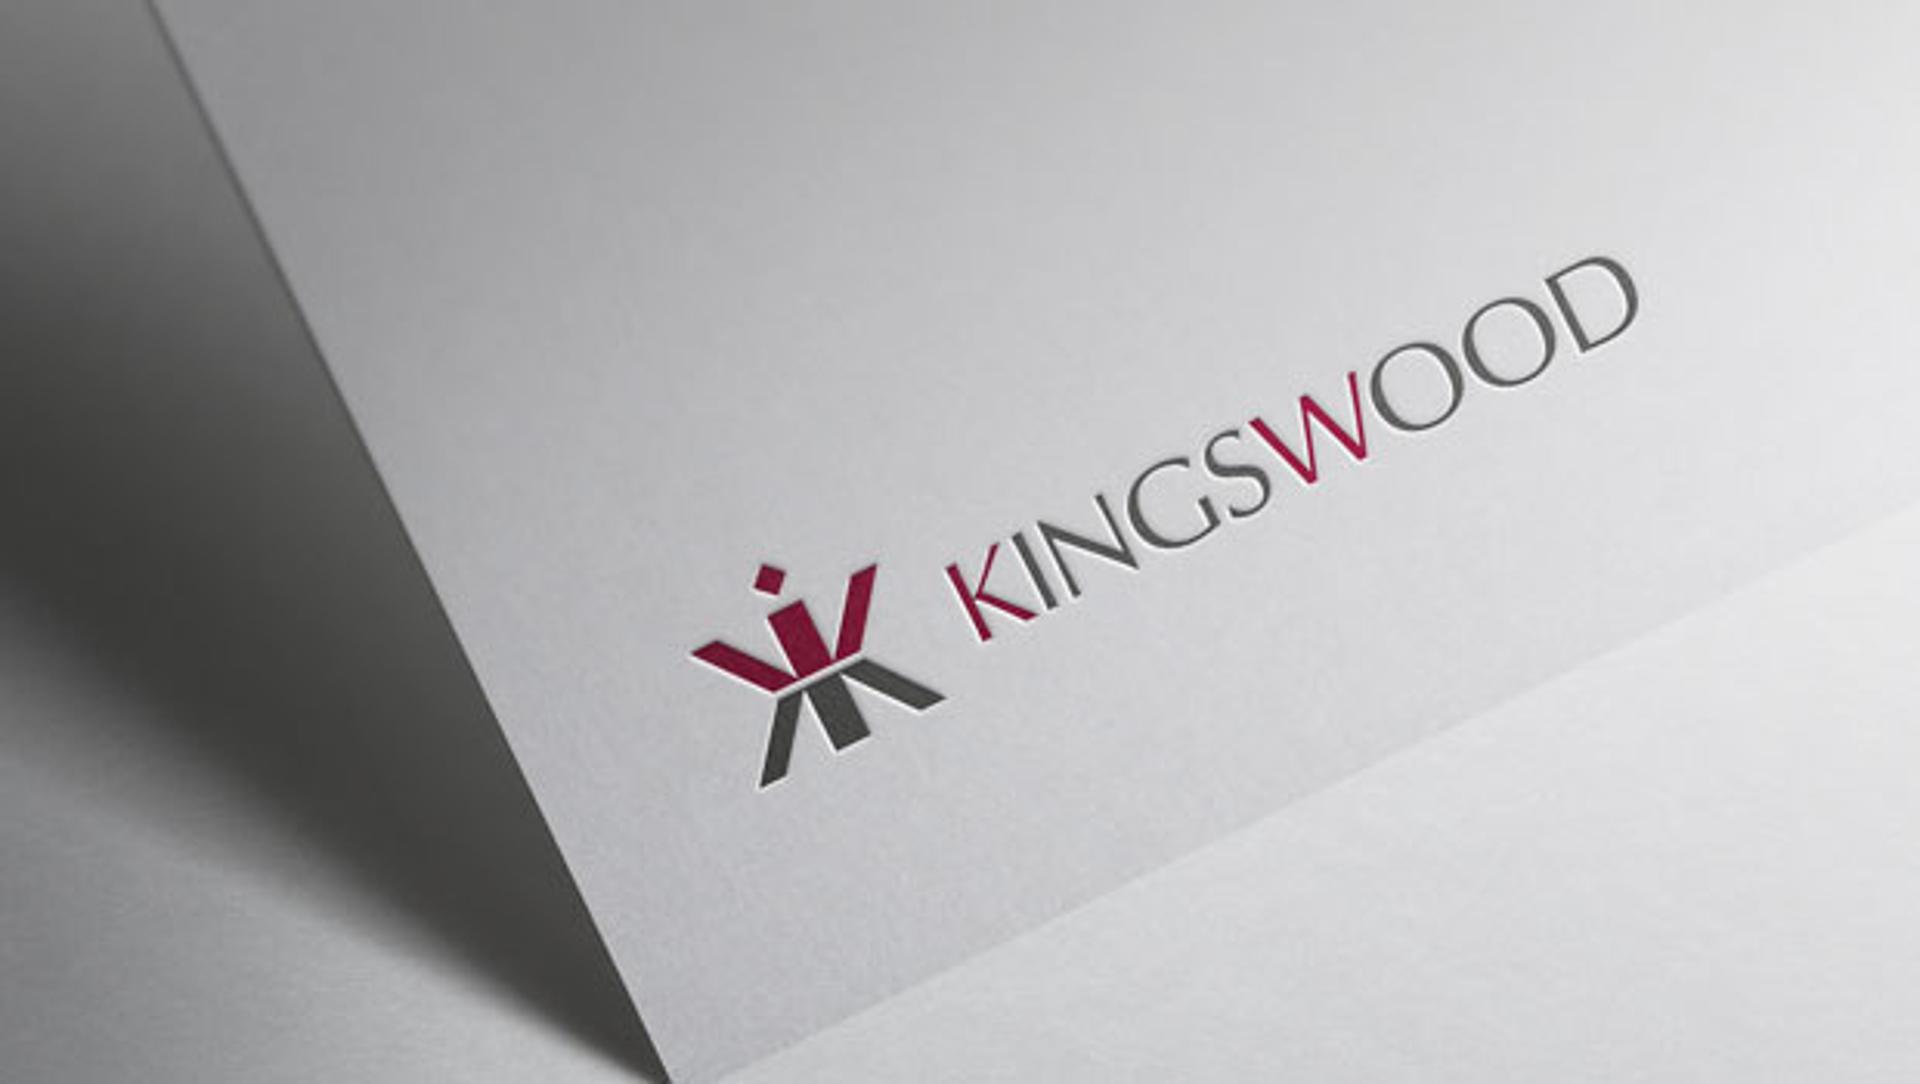 Kingswood strikes first deal of 2022 as acquisition drive continues